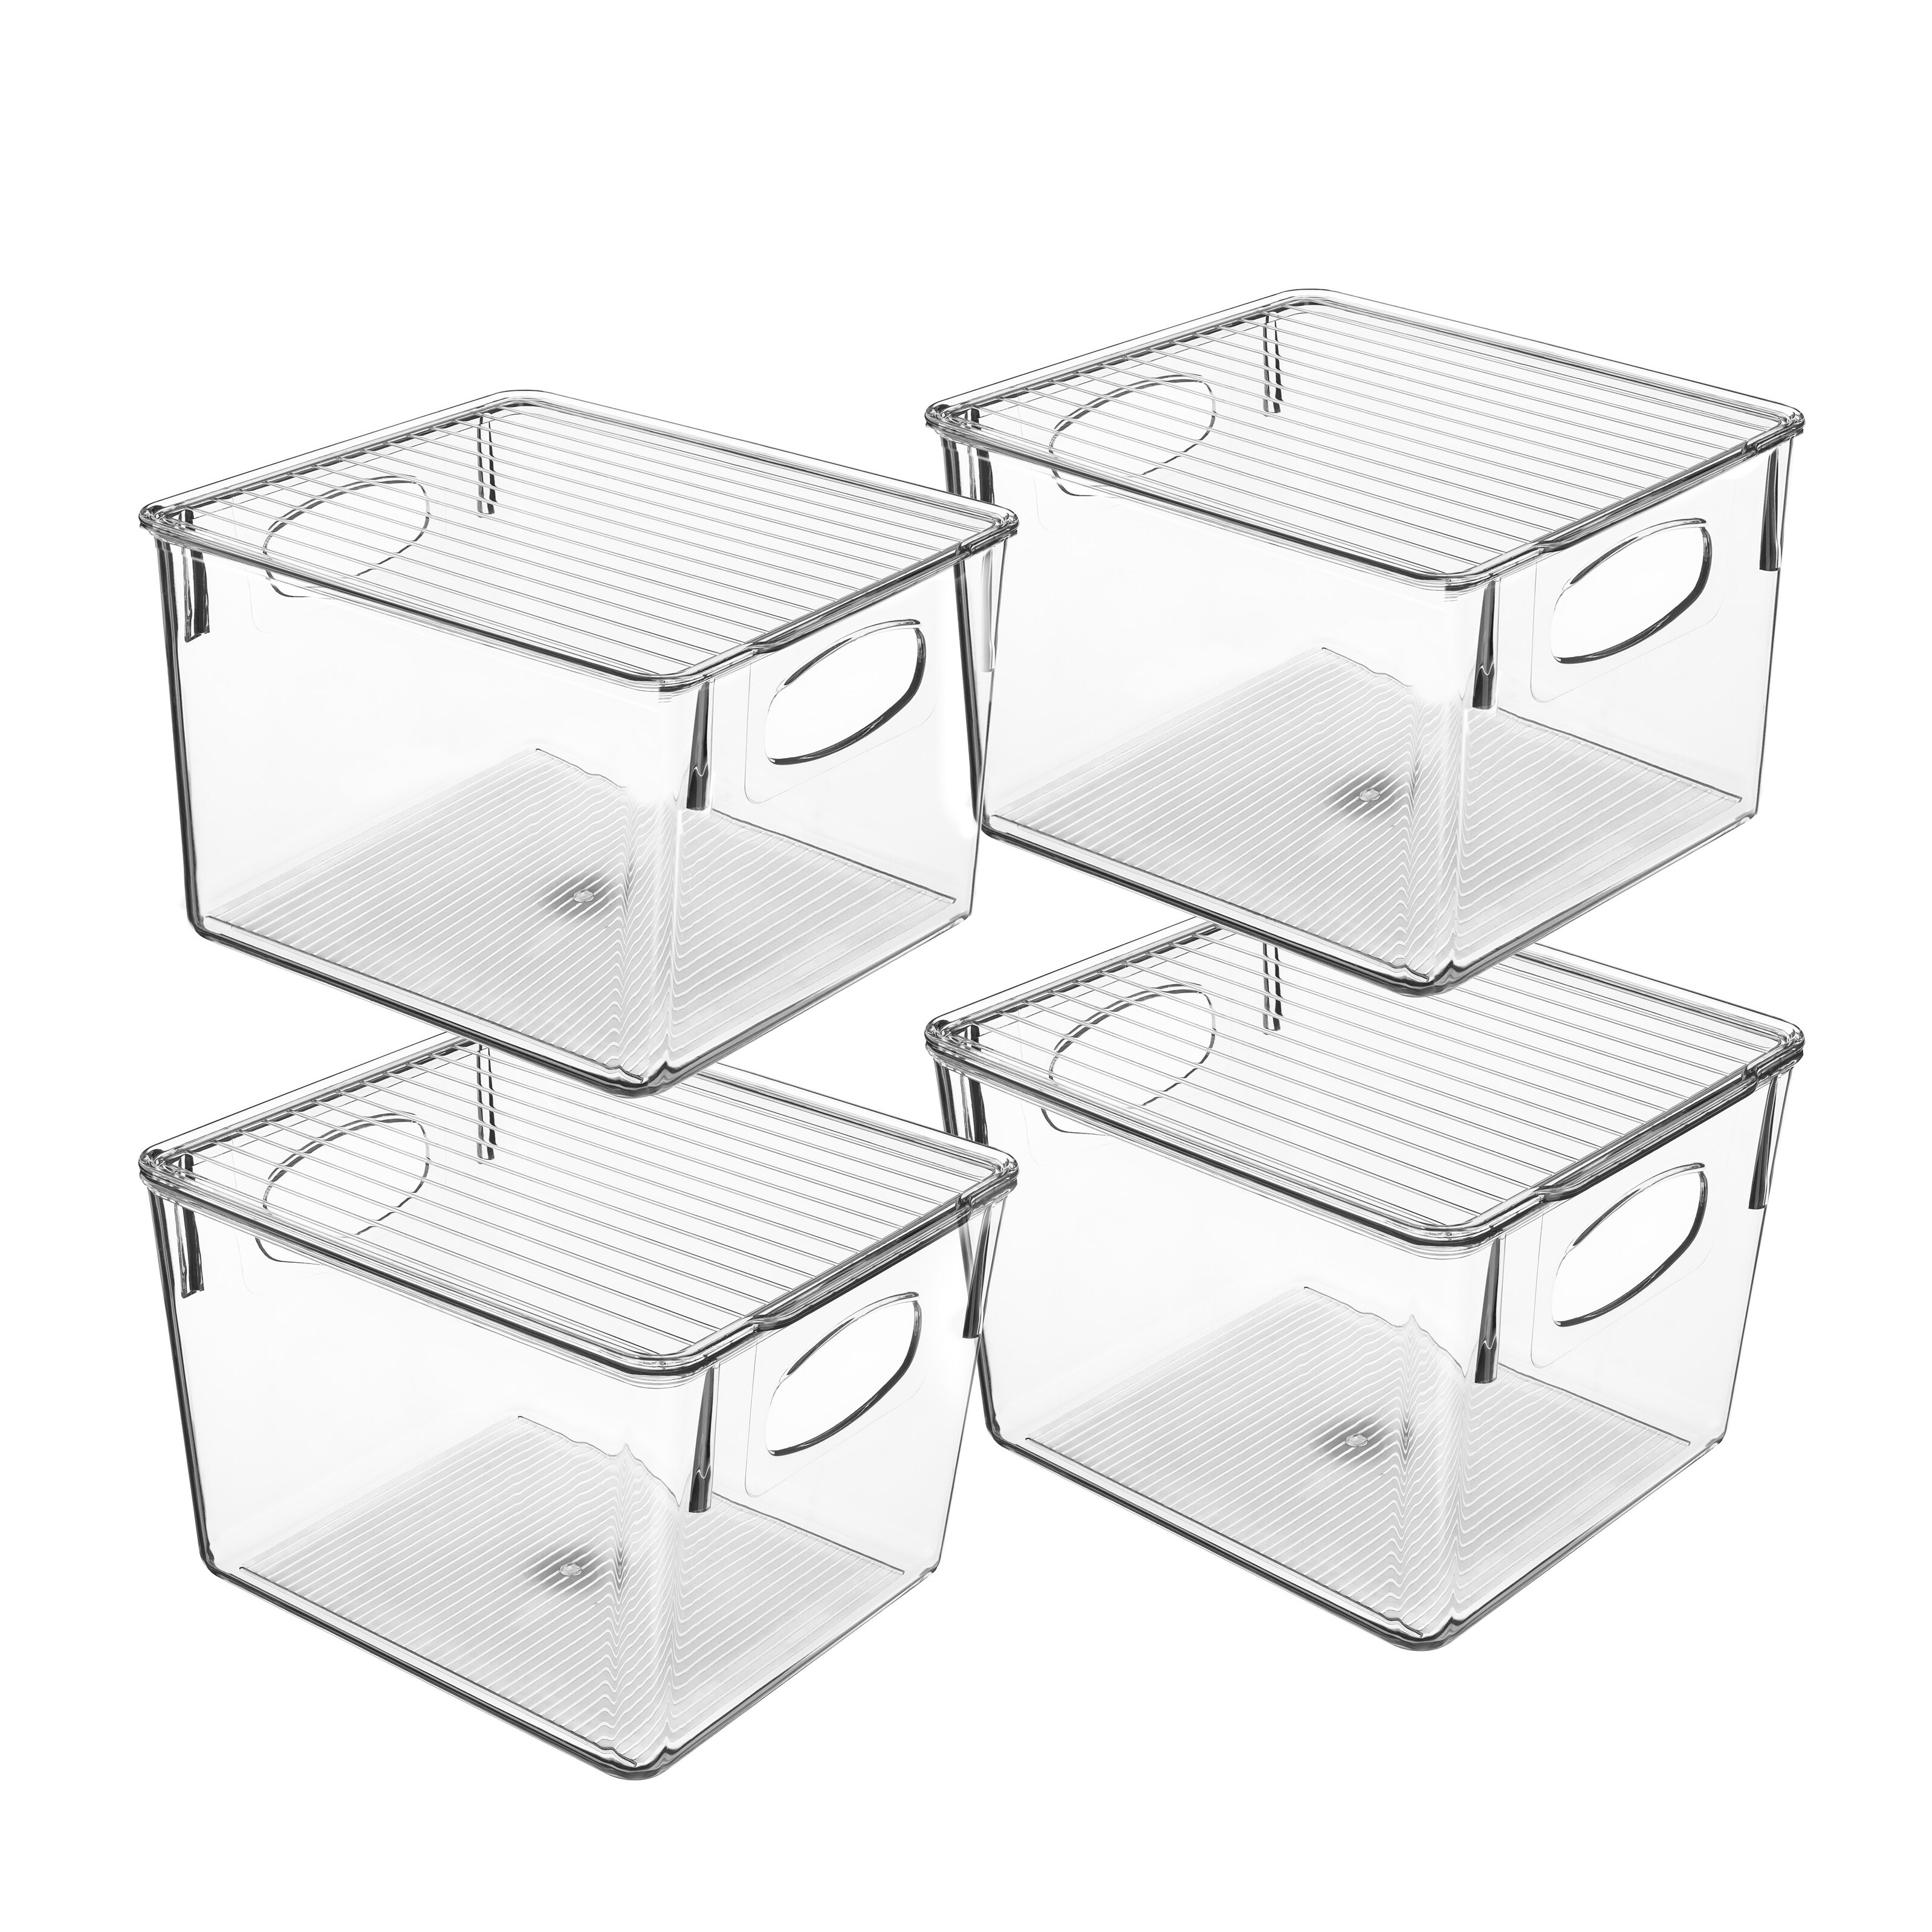 https://ak1.ostkcdn.com/images/products/is/images/direct/dfe21911d21029427522fe8b849a6d9ee42a04eb/Stackable-Fridge-Freezer-Bins-Organizer-w-Lid-Food-Storage-Containers.jpg